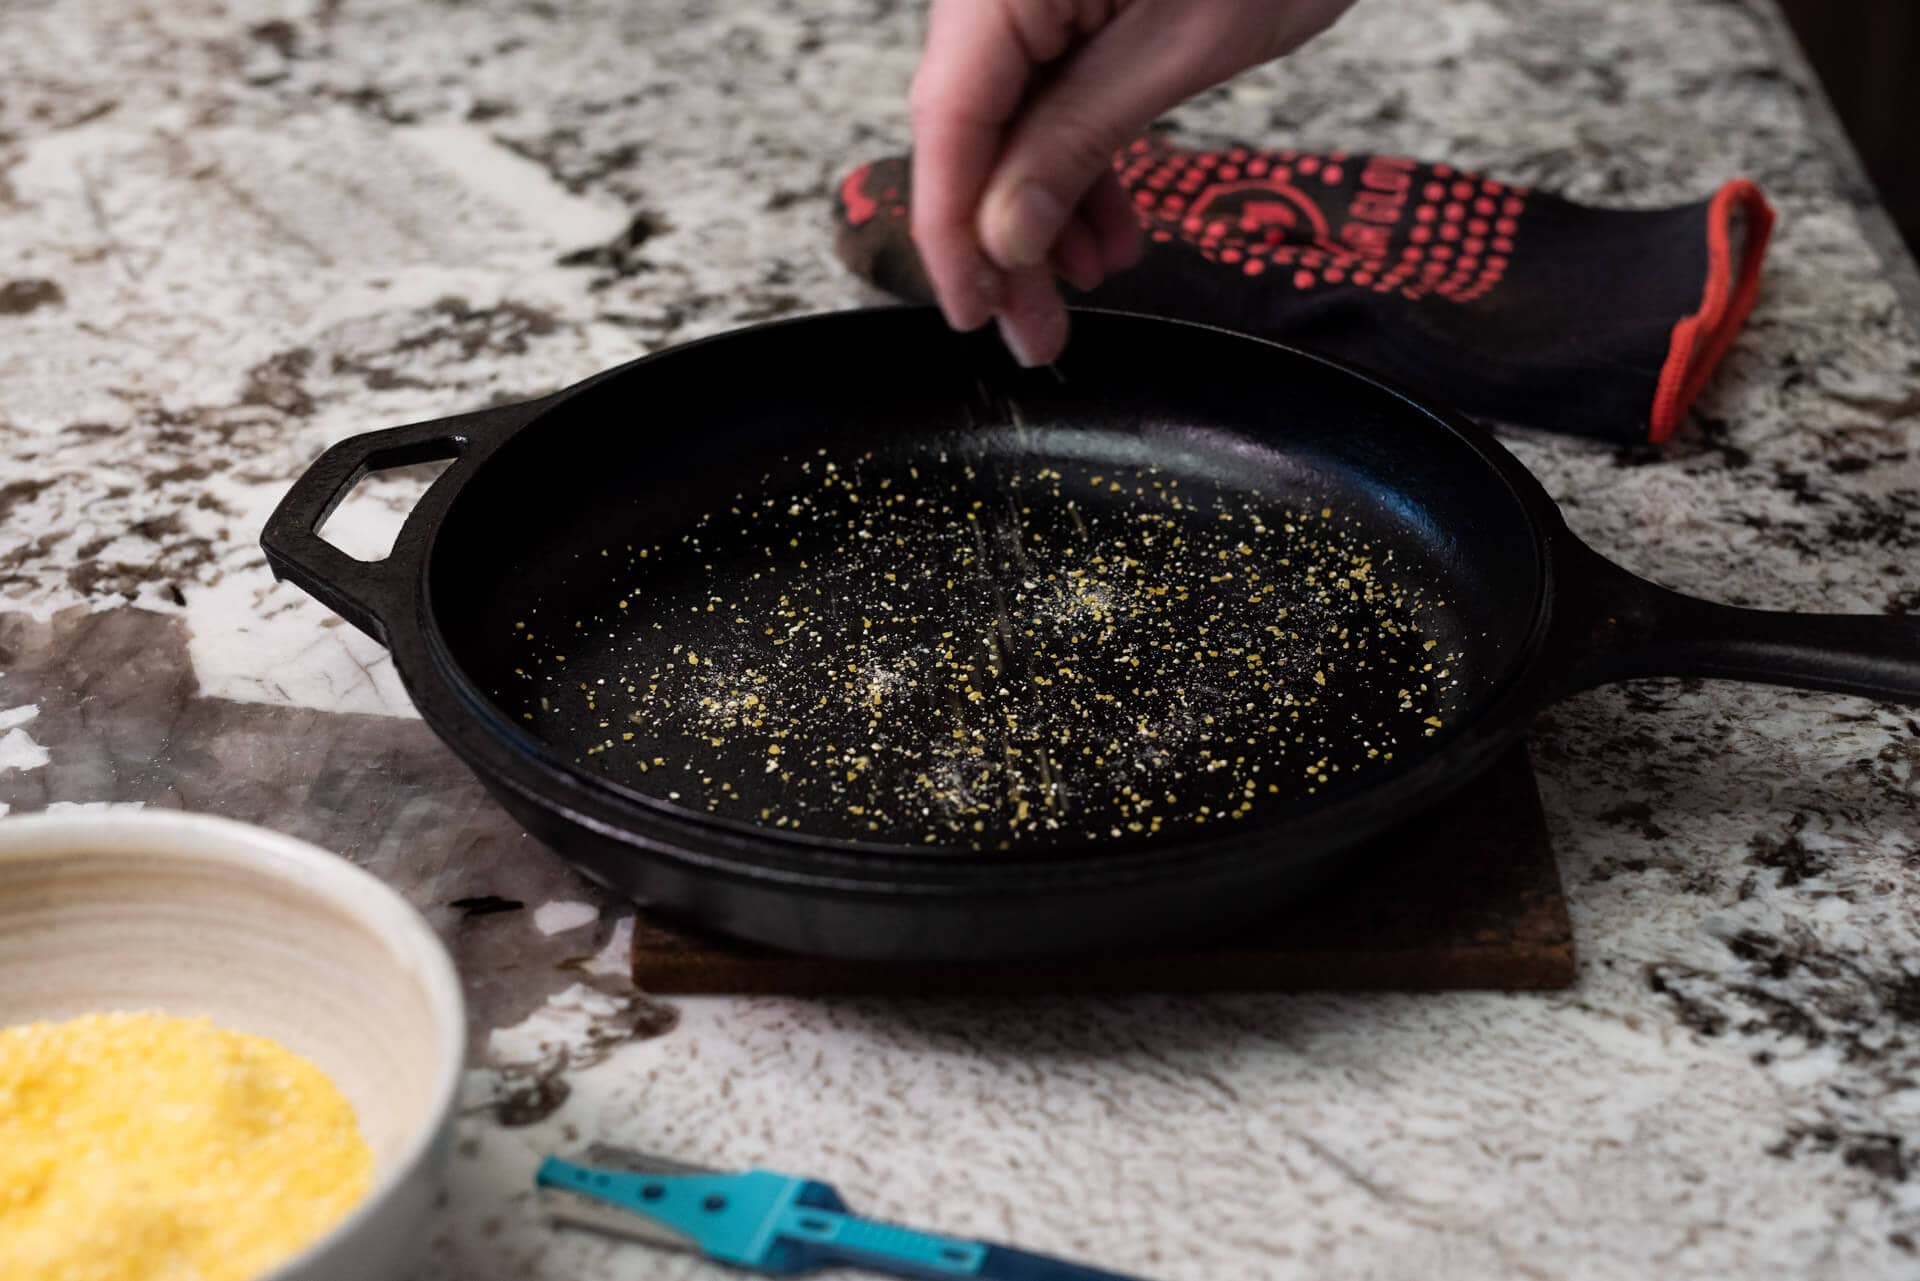 This Is Why You Should Be Baking with a Cast Iron Skillet